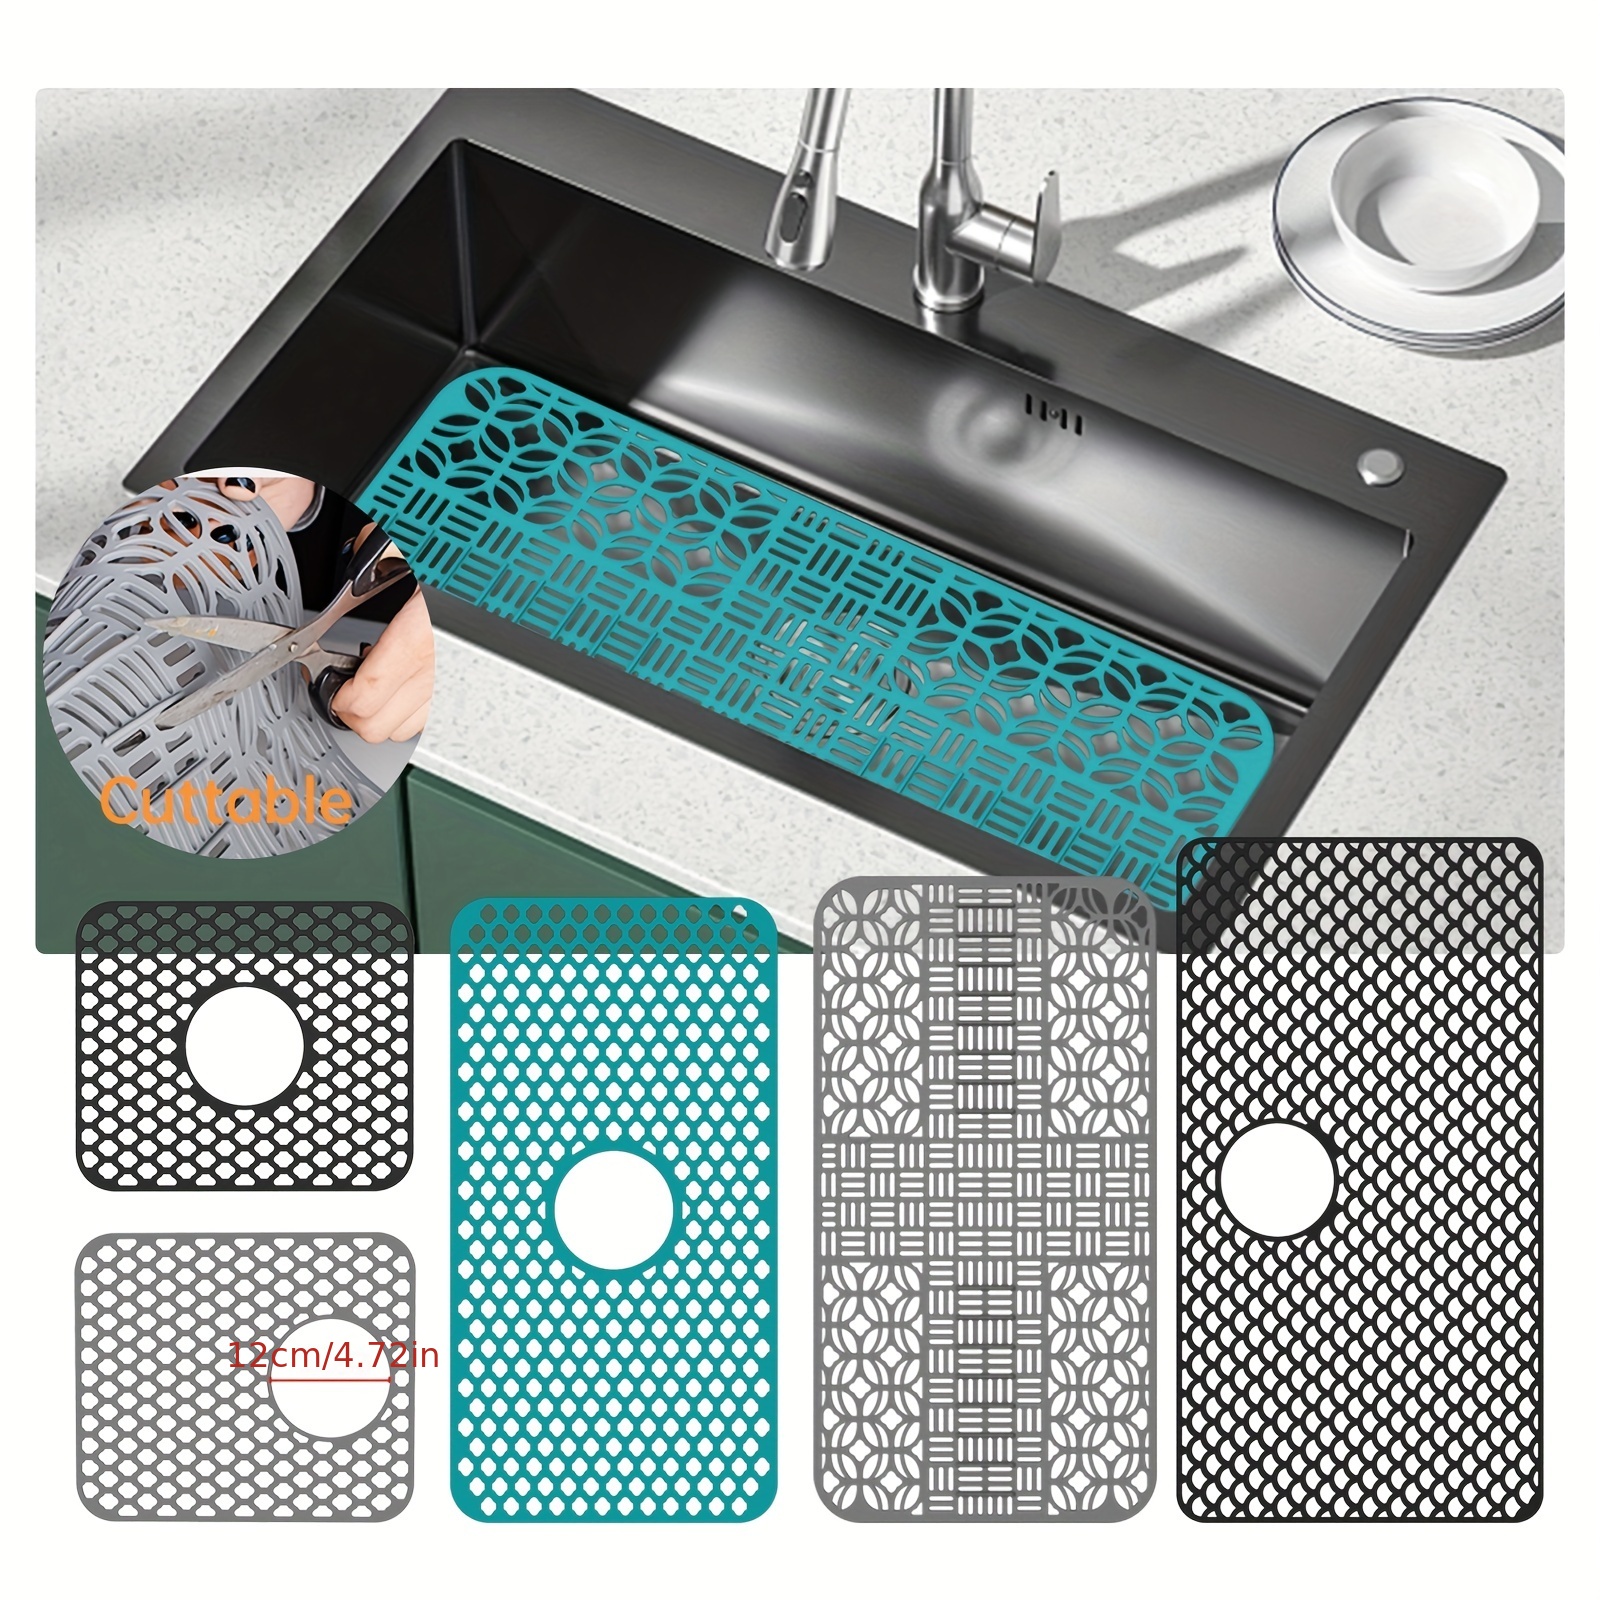 20288ASH by Sterling - Ludington® Silicone sink mat